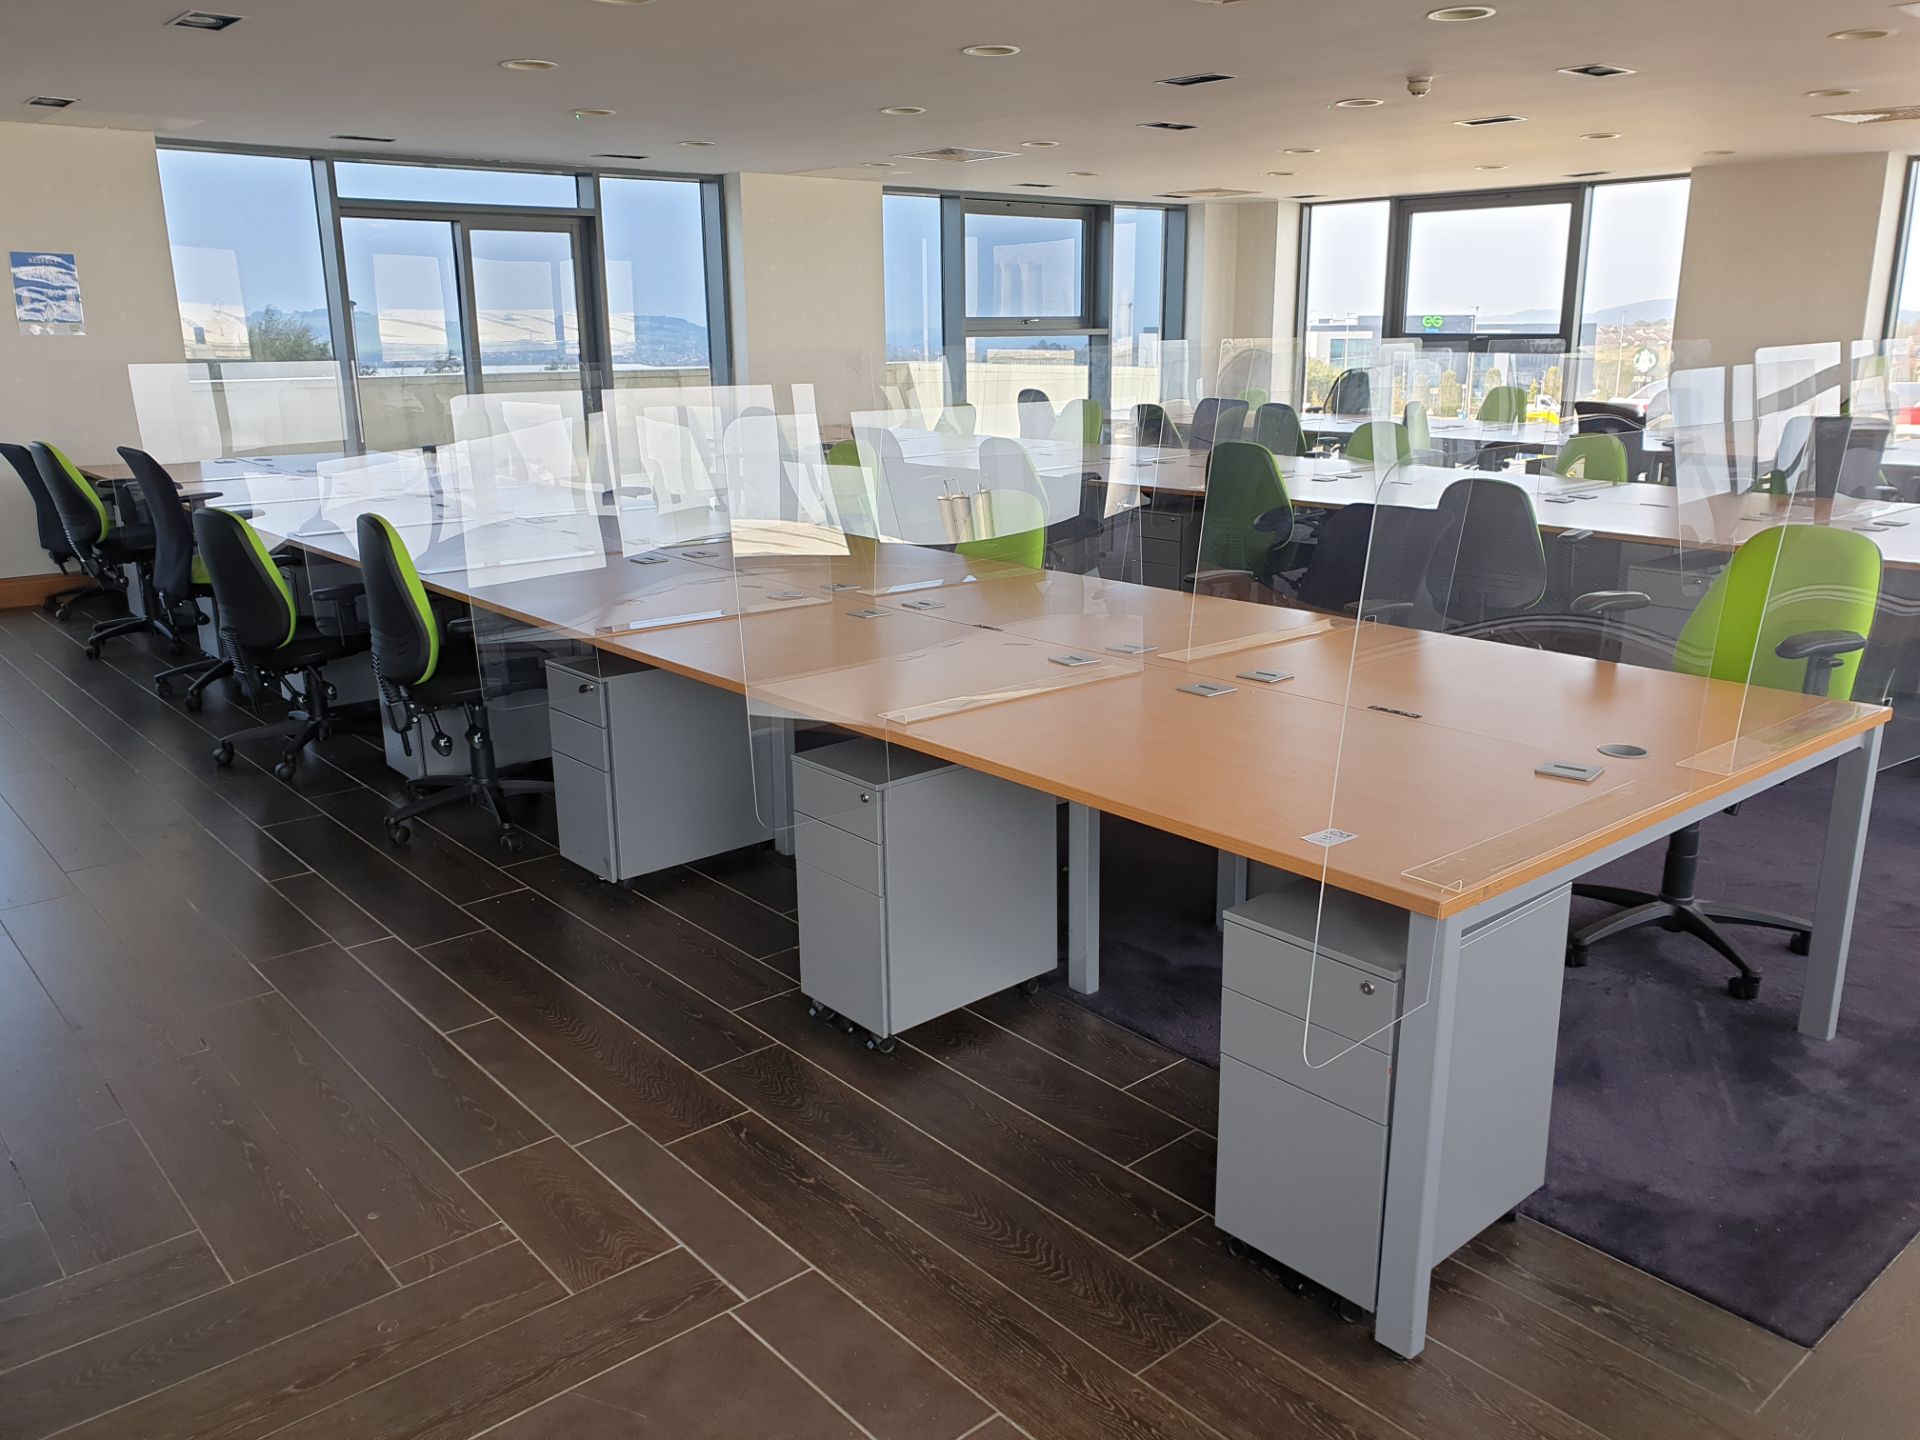 14 Person Workstation / Desks with covid screens